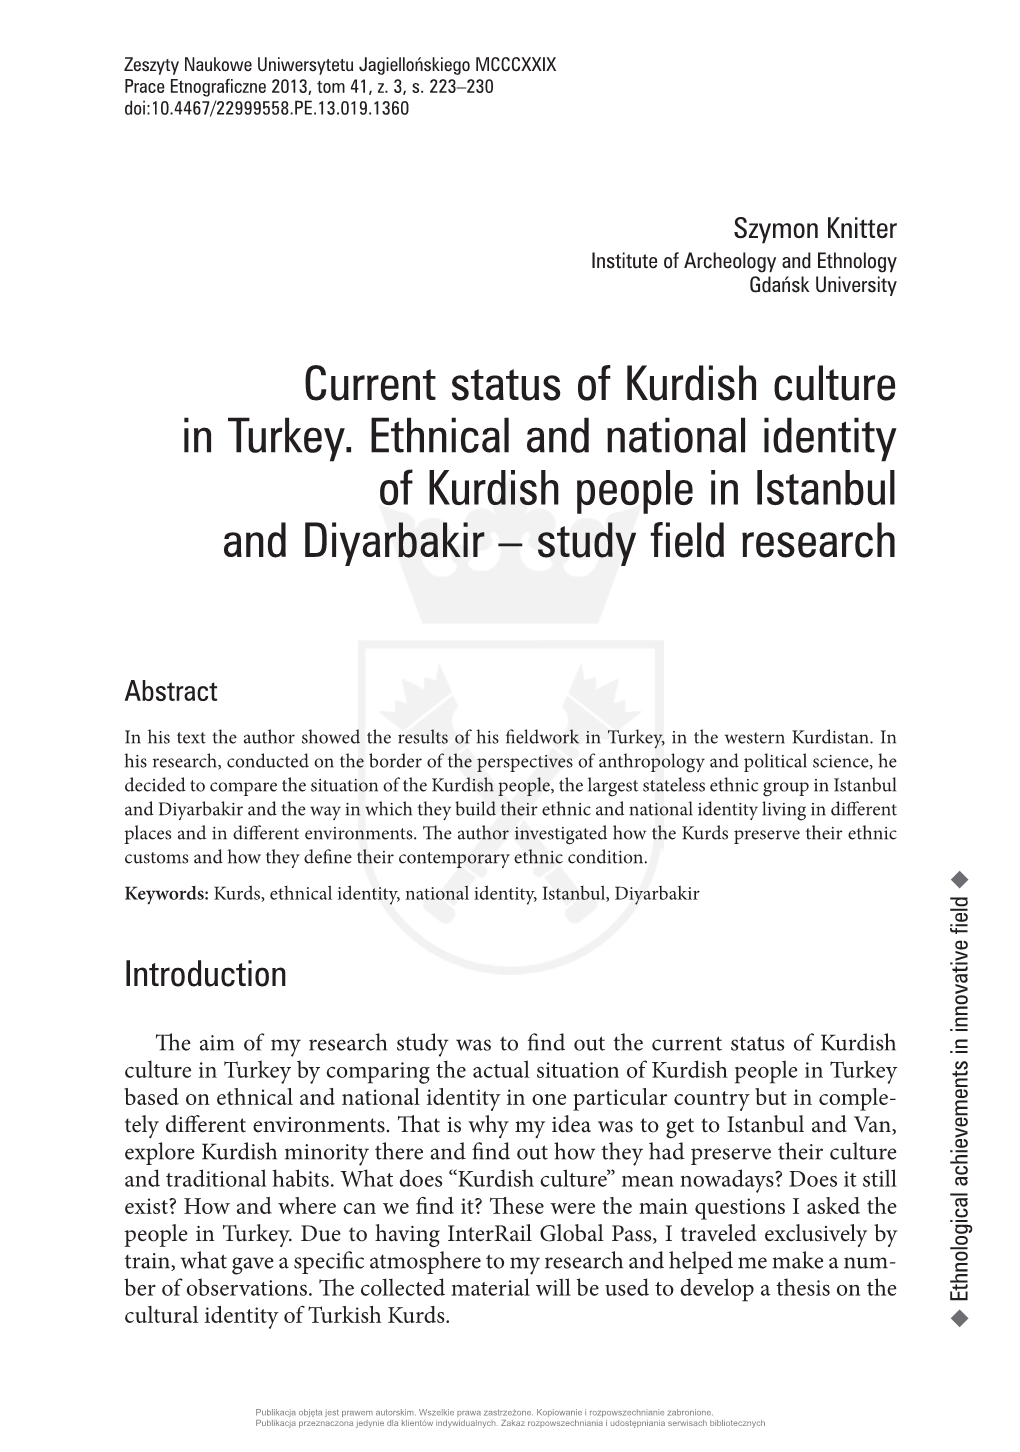 Current Status of Kurdish Culture in Turkey. Ethnical and National Identity of Kurdish People in Istanbul and Diyarbakir – Study Field Research